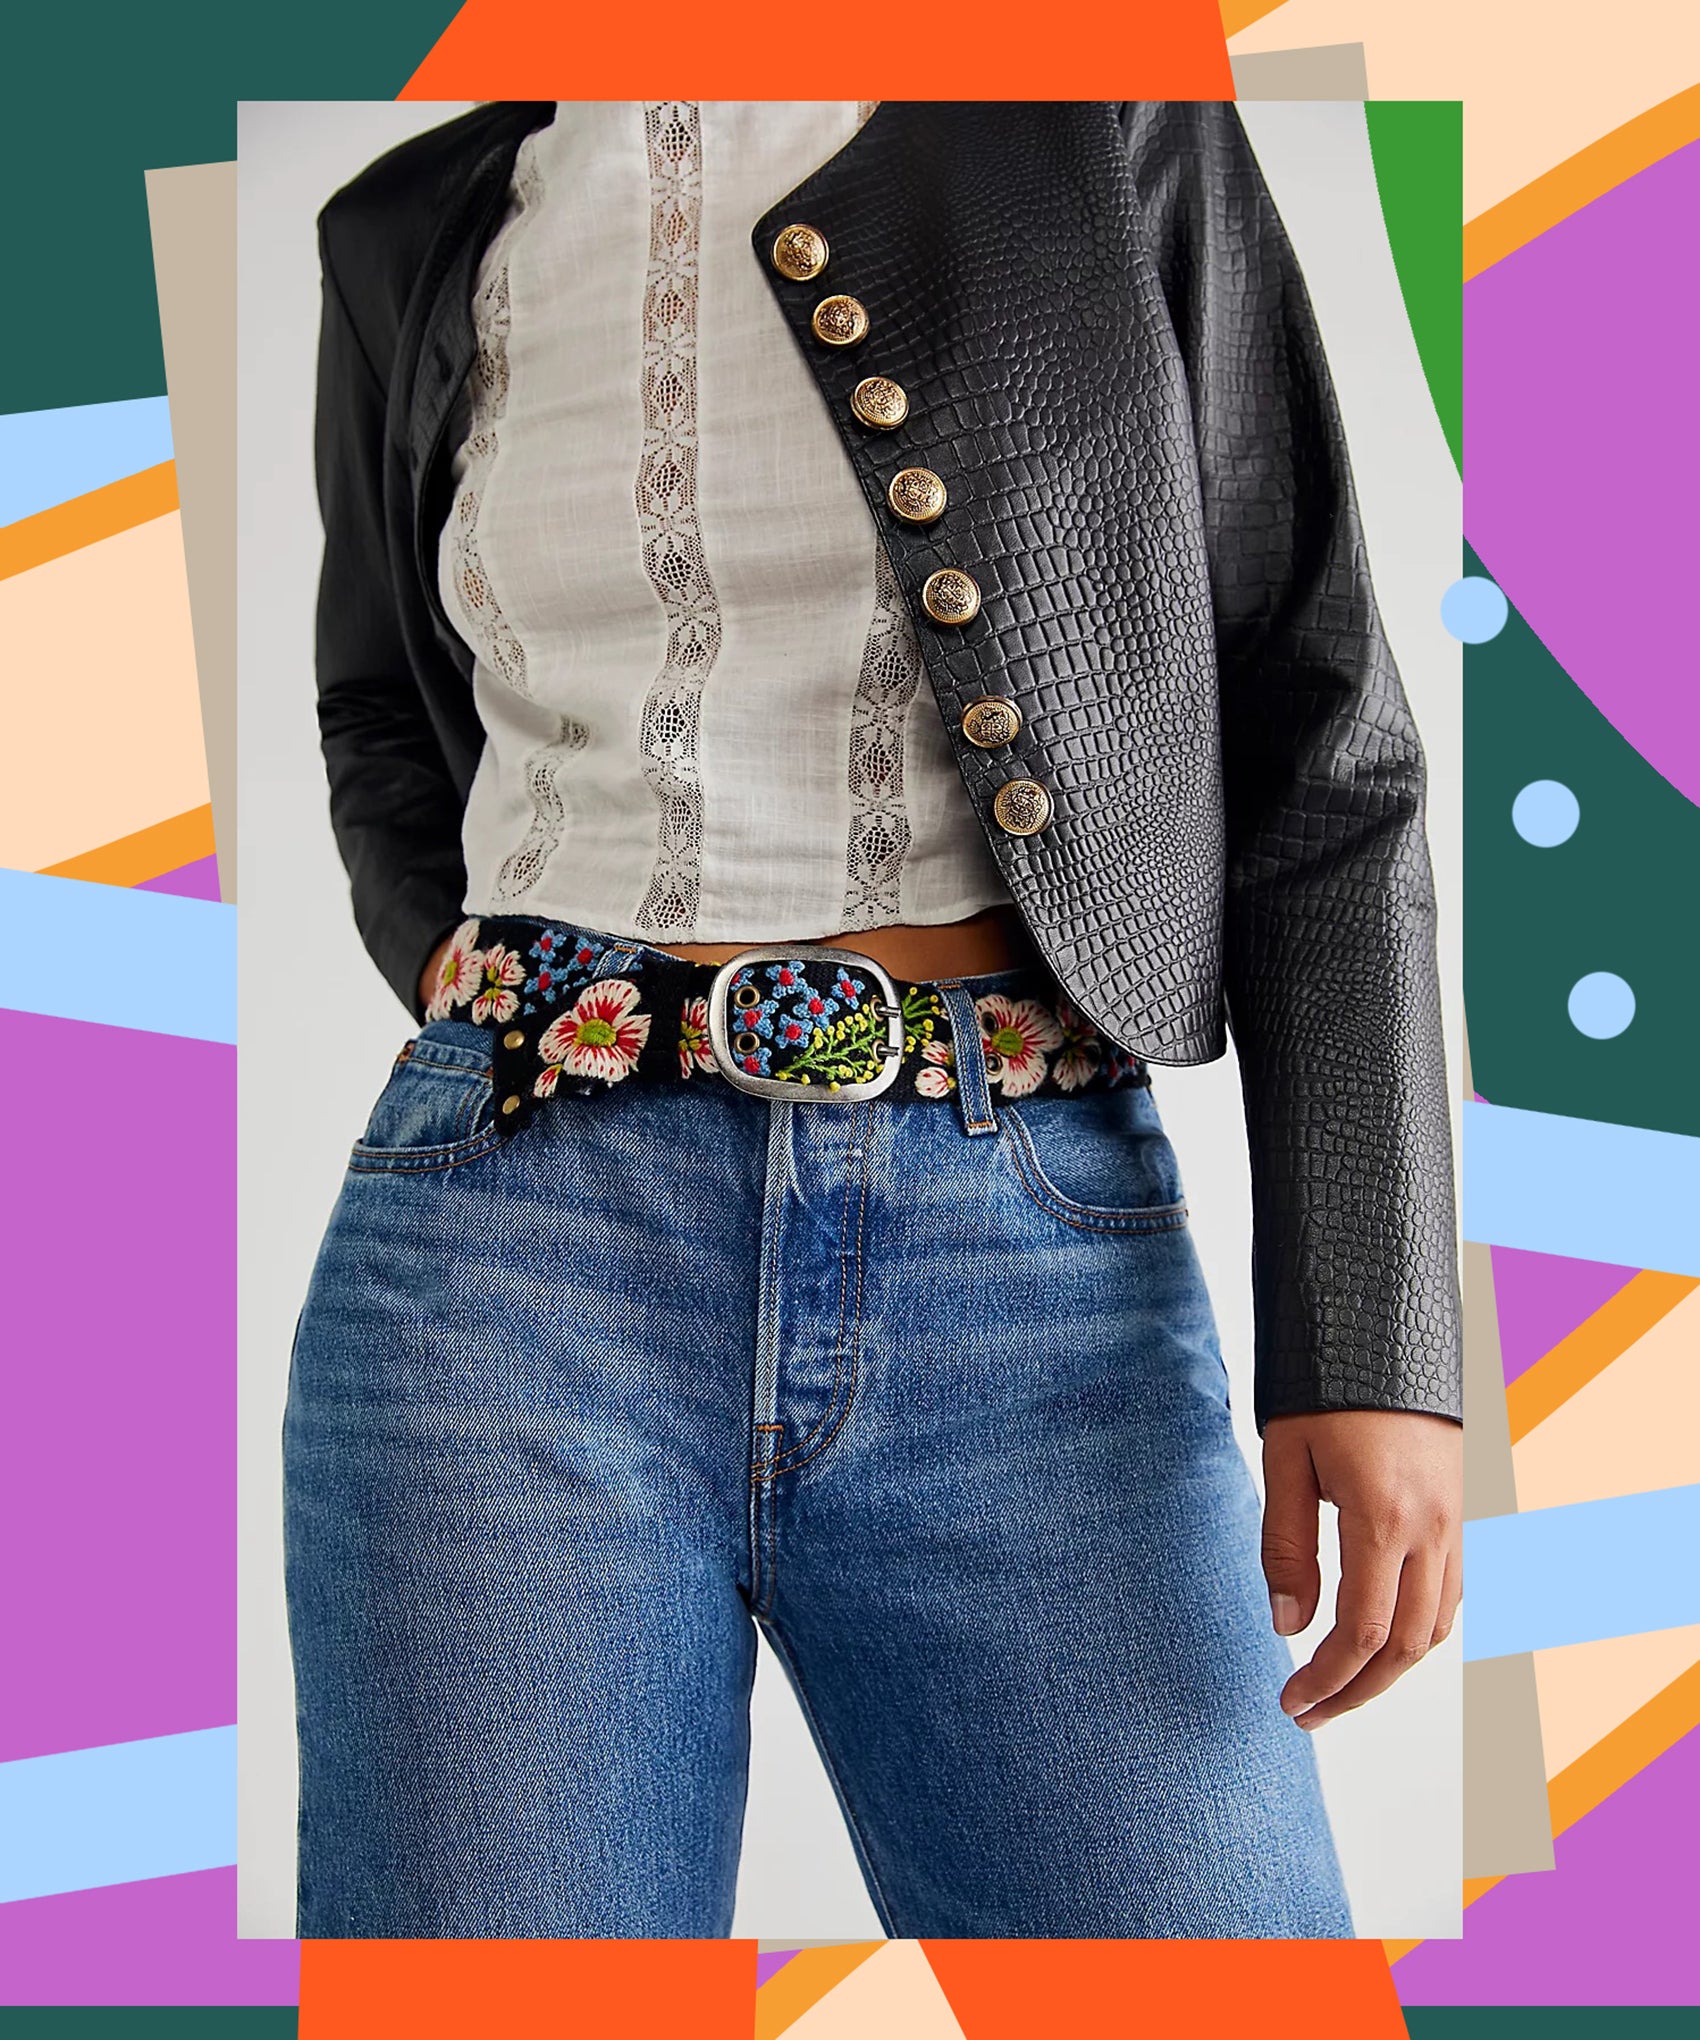 A Statement Belt Is the Viral Accessory That Will Transform Your